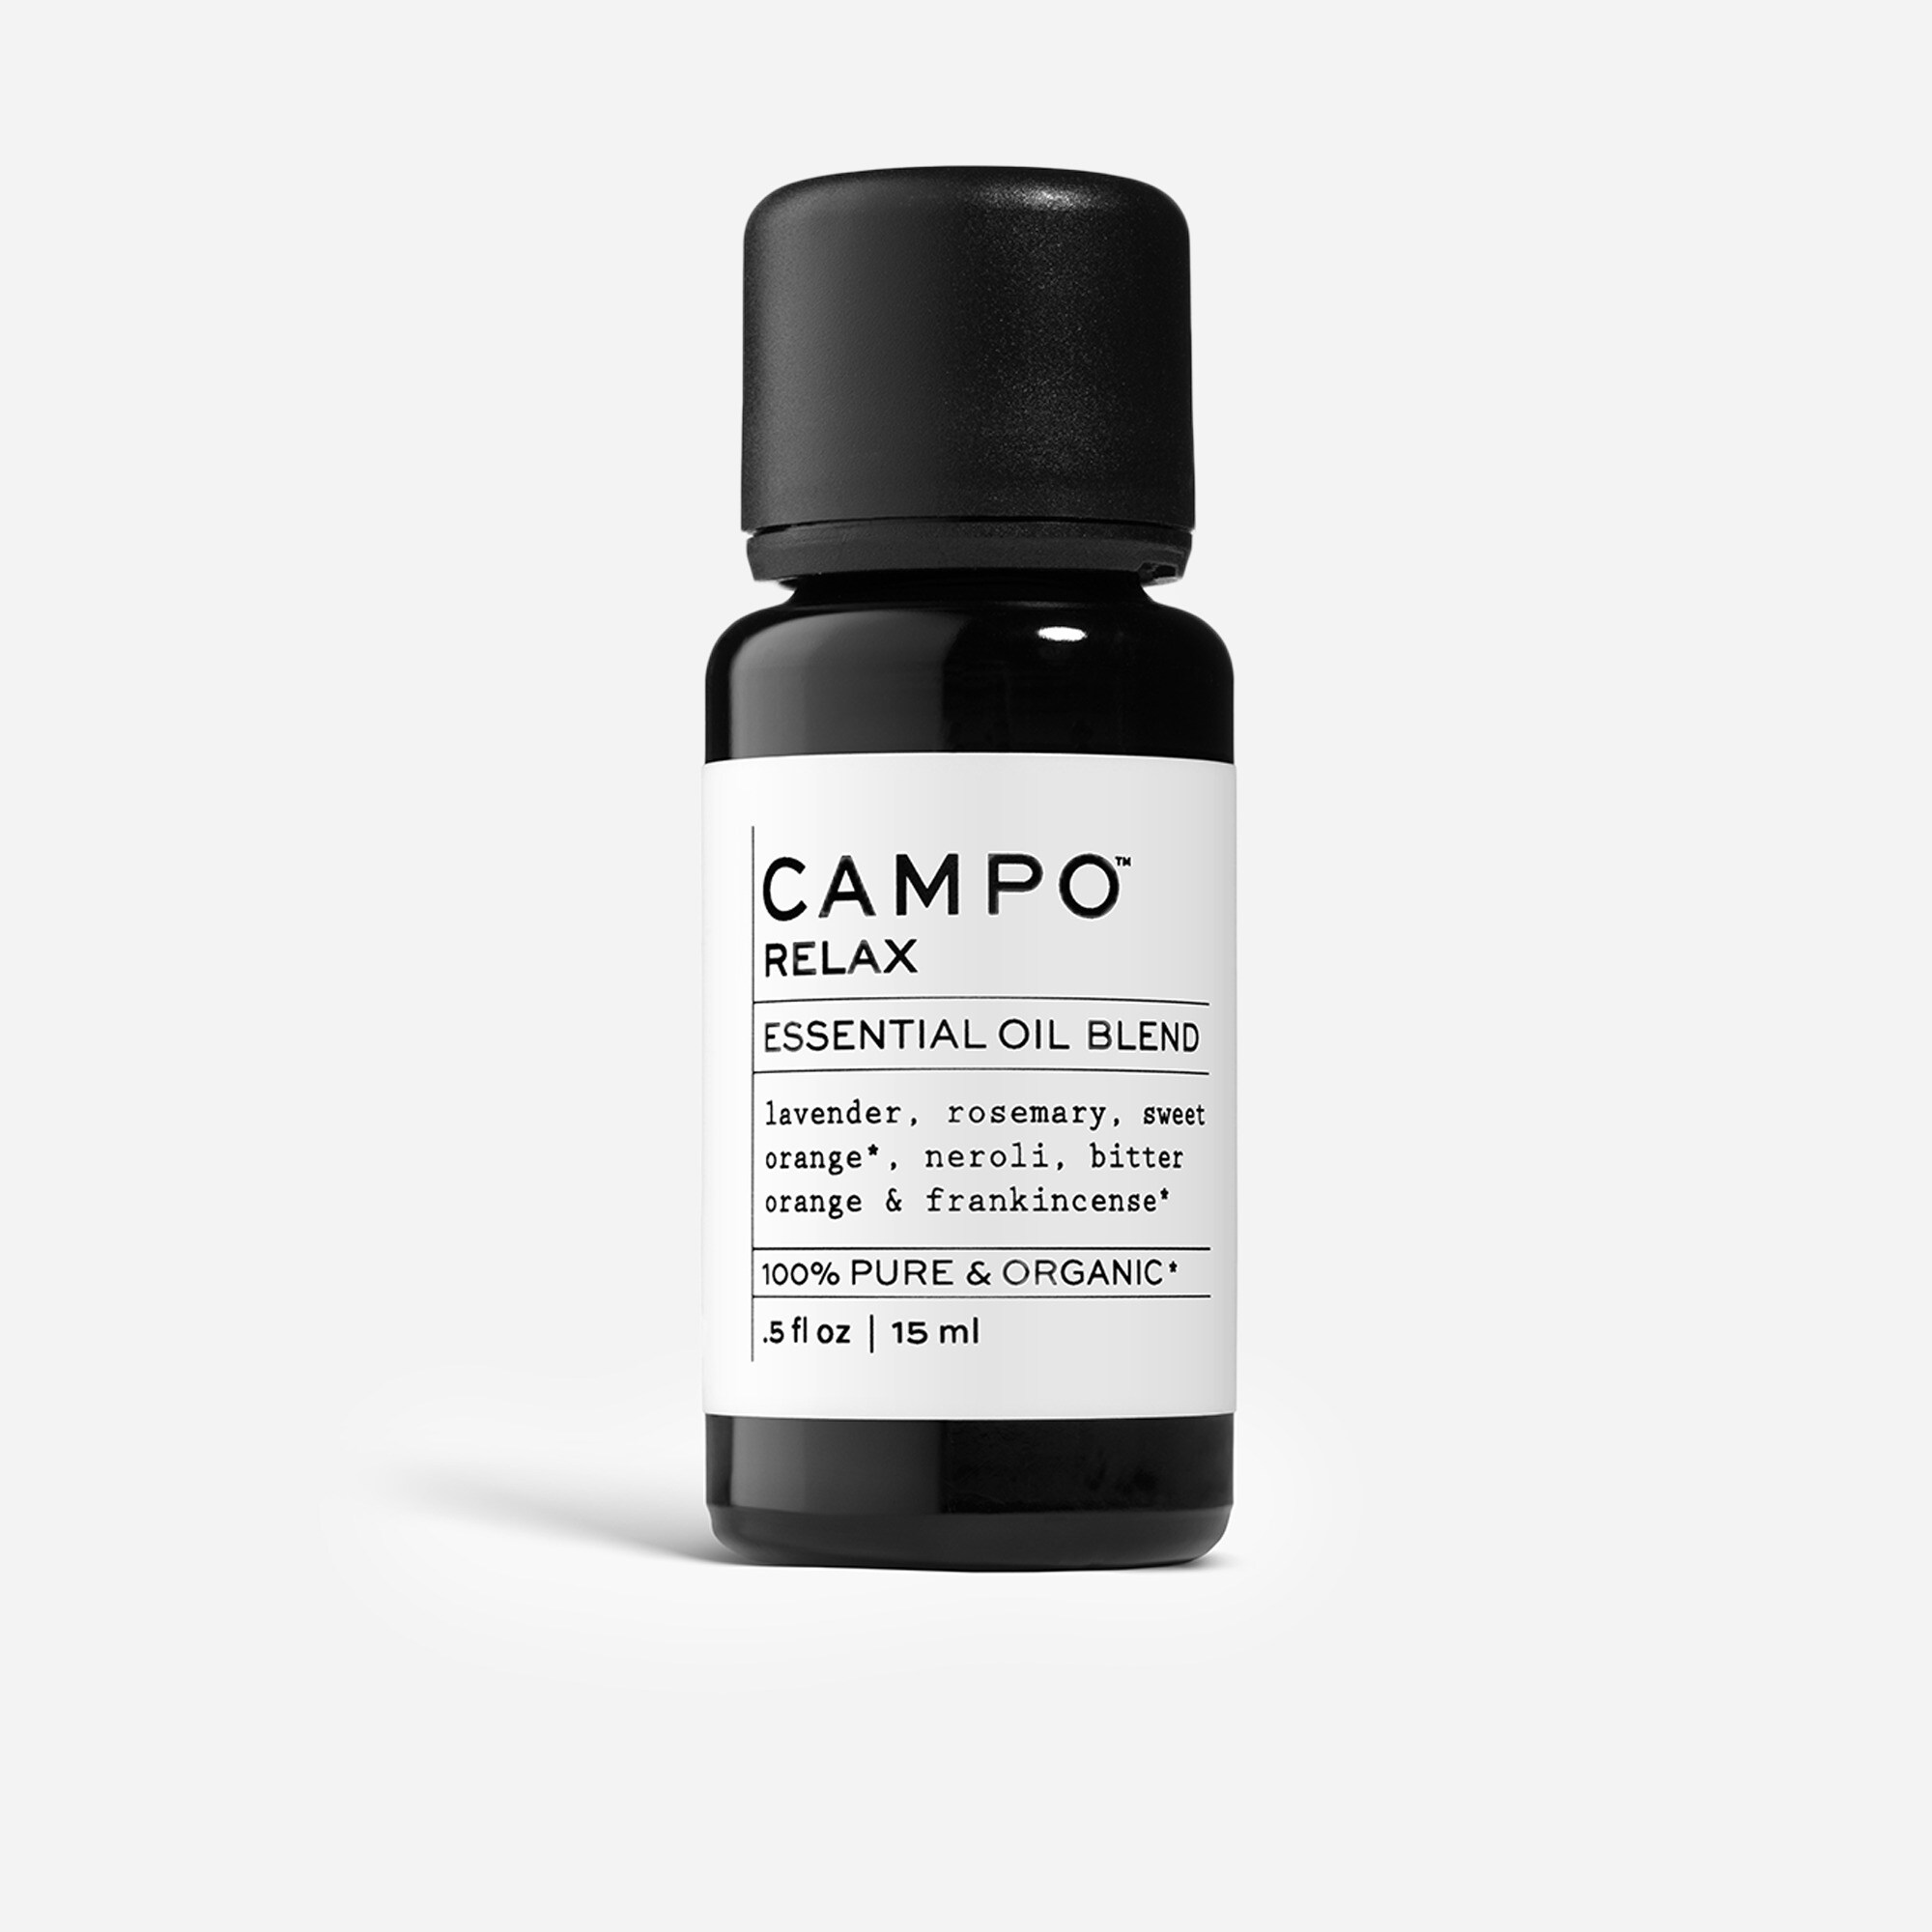  CAMPO® RELAX pure essential oil blend